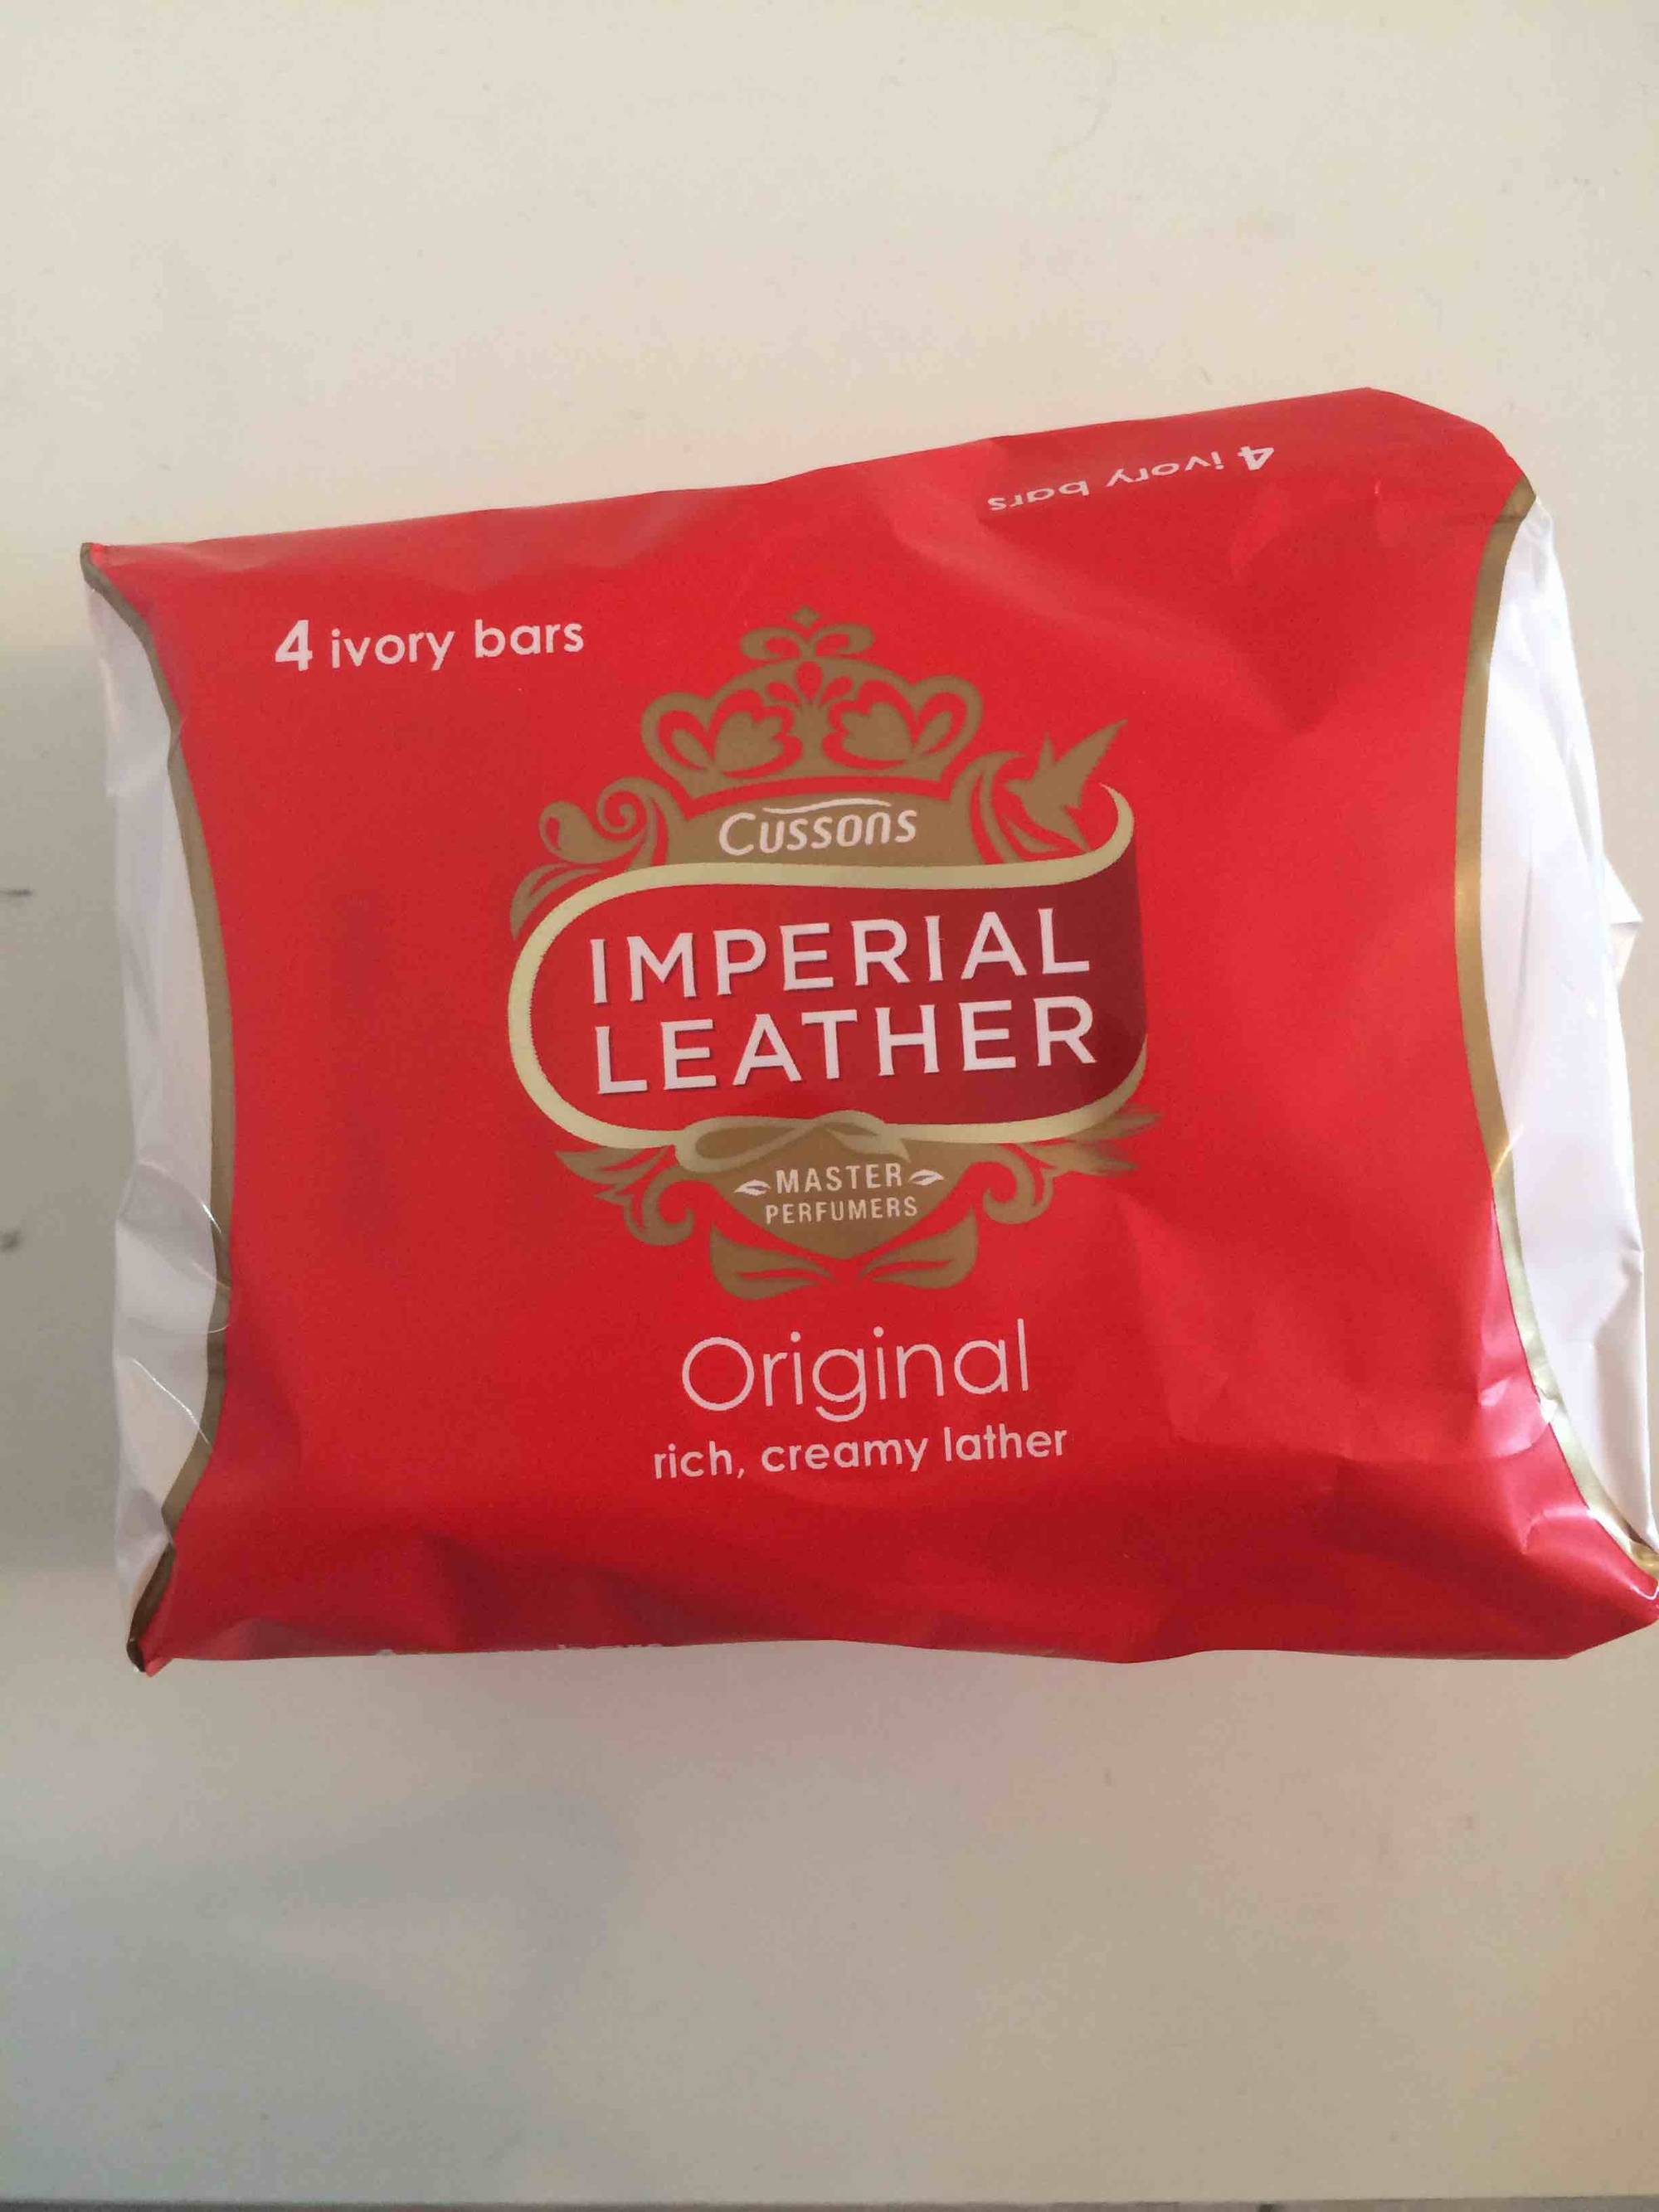 IMPERIAL LEATHER - Original bar soap ivory